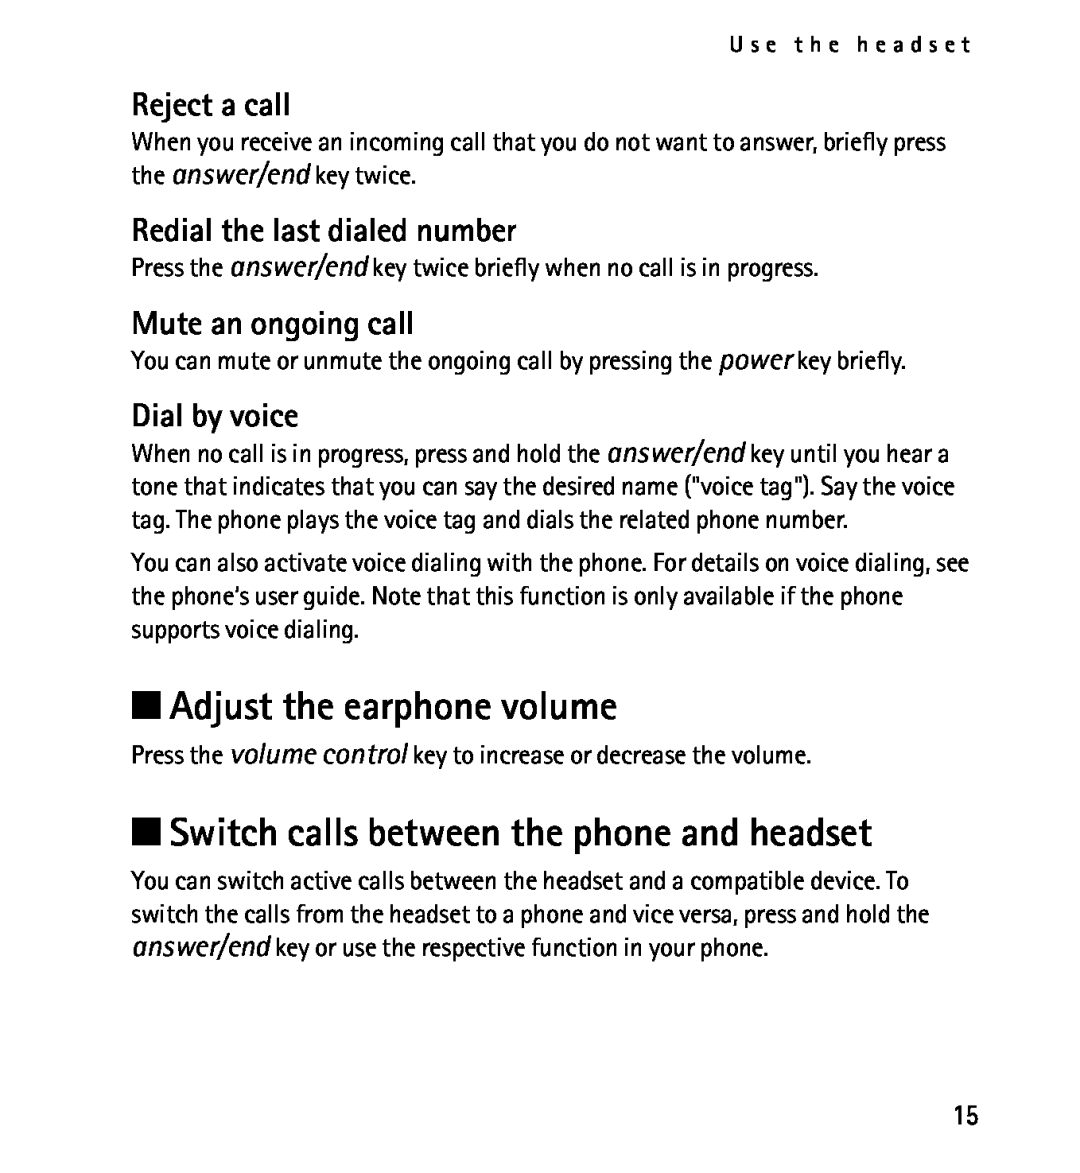 Nokia 9232254 Adjust the earphone volume, Switch calls between the phone and headset, Reject a call, Mute an ongoing call 